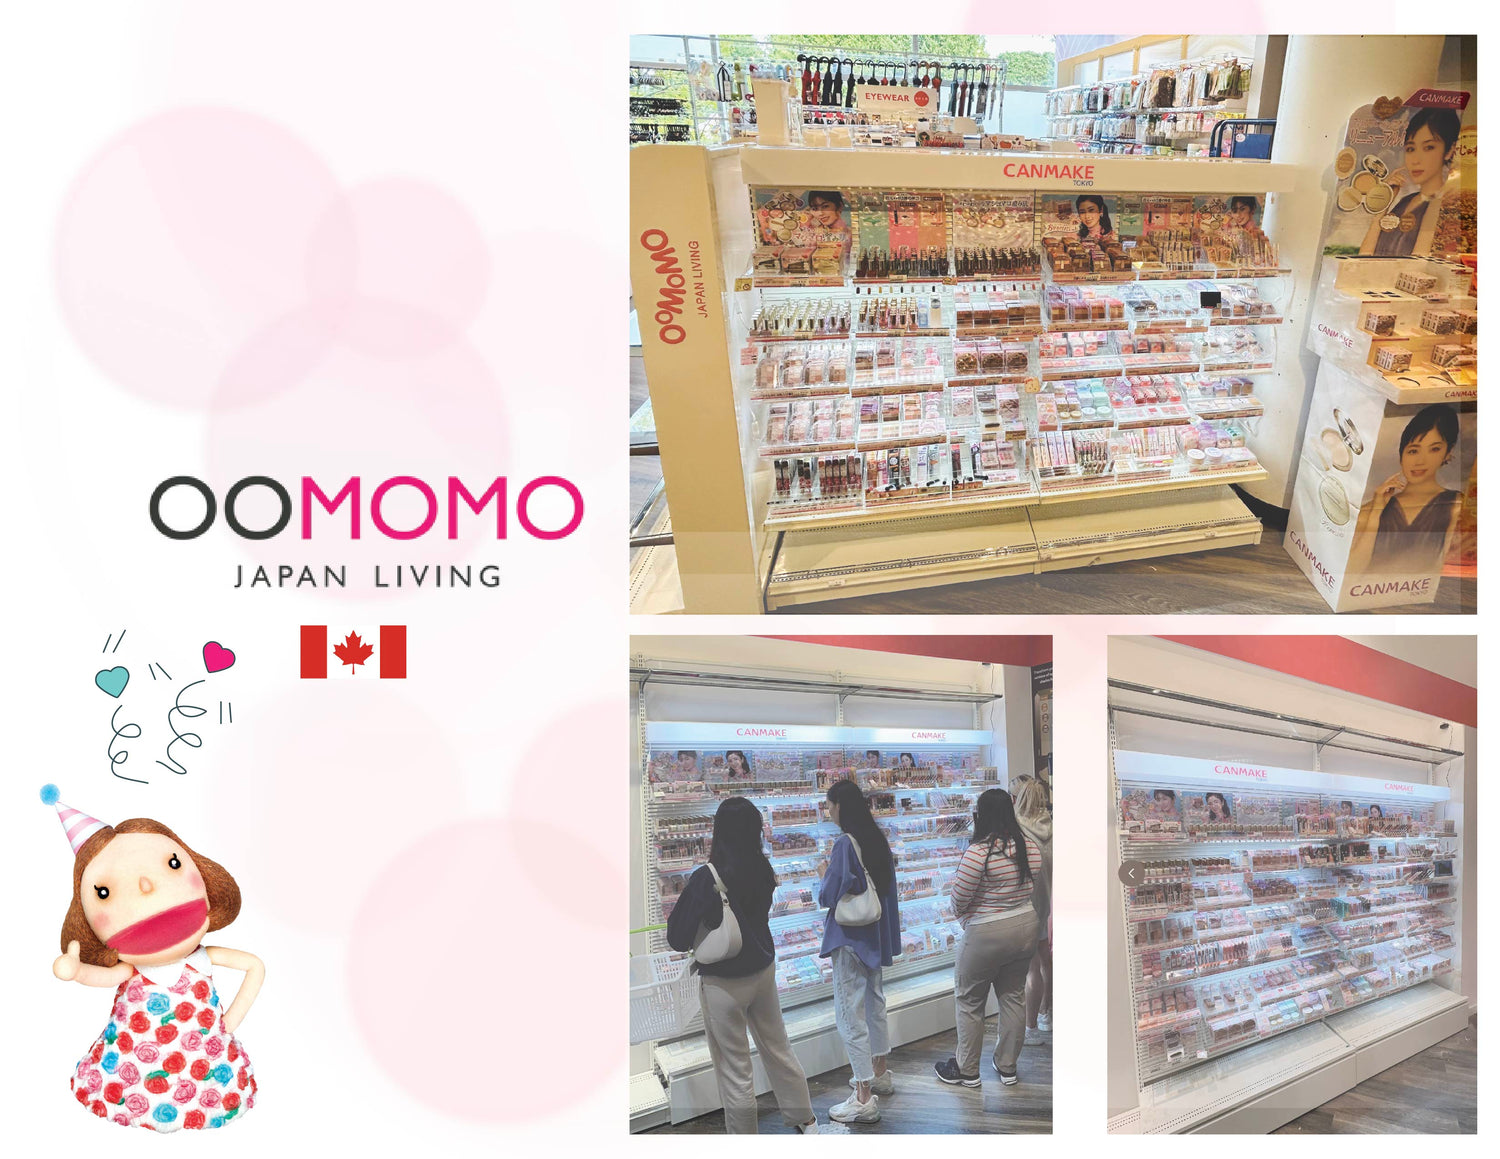 NEWS 💕 Excited to announce launch of the CANMAKE Full line at OOMOMO Japan living store